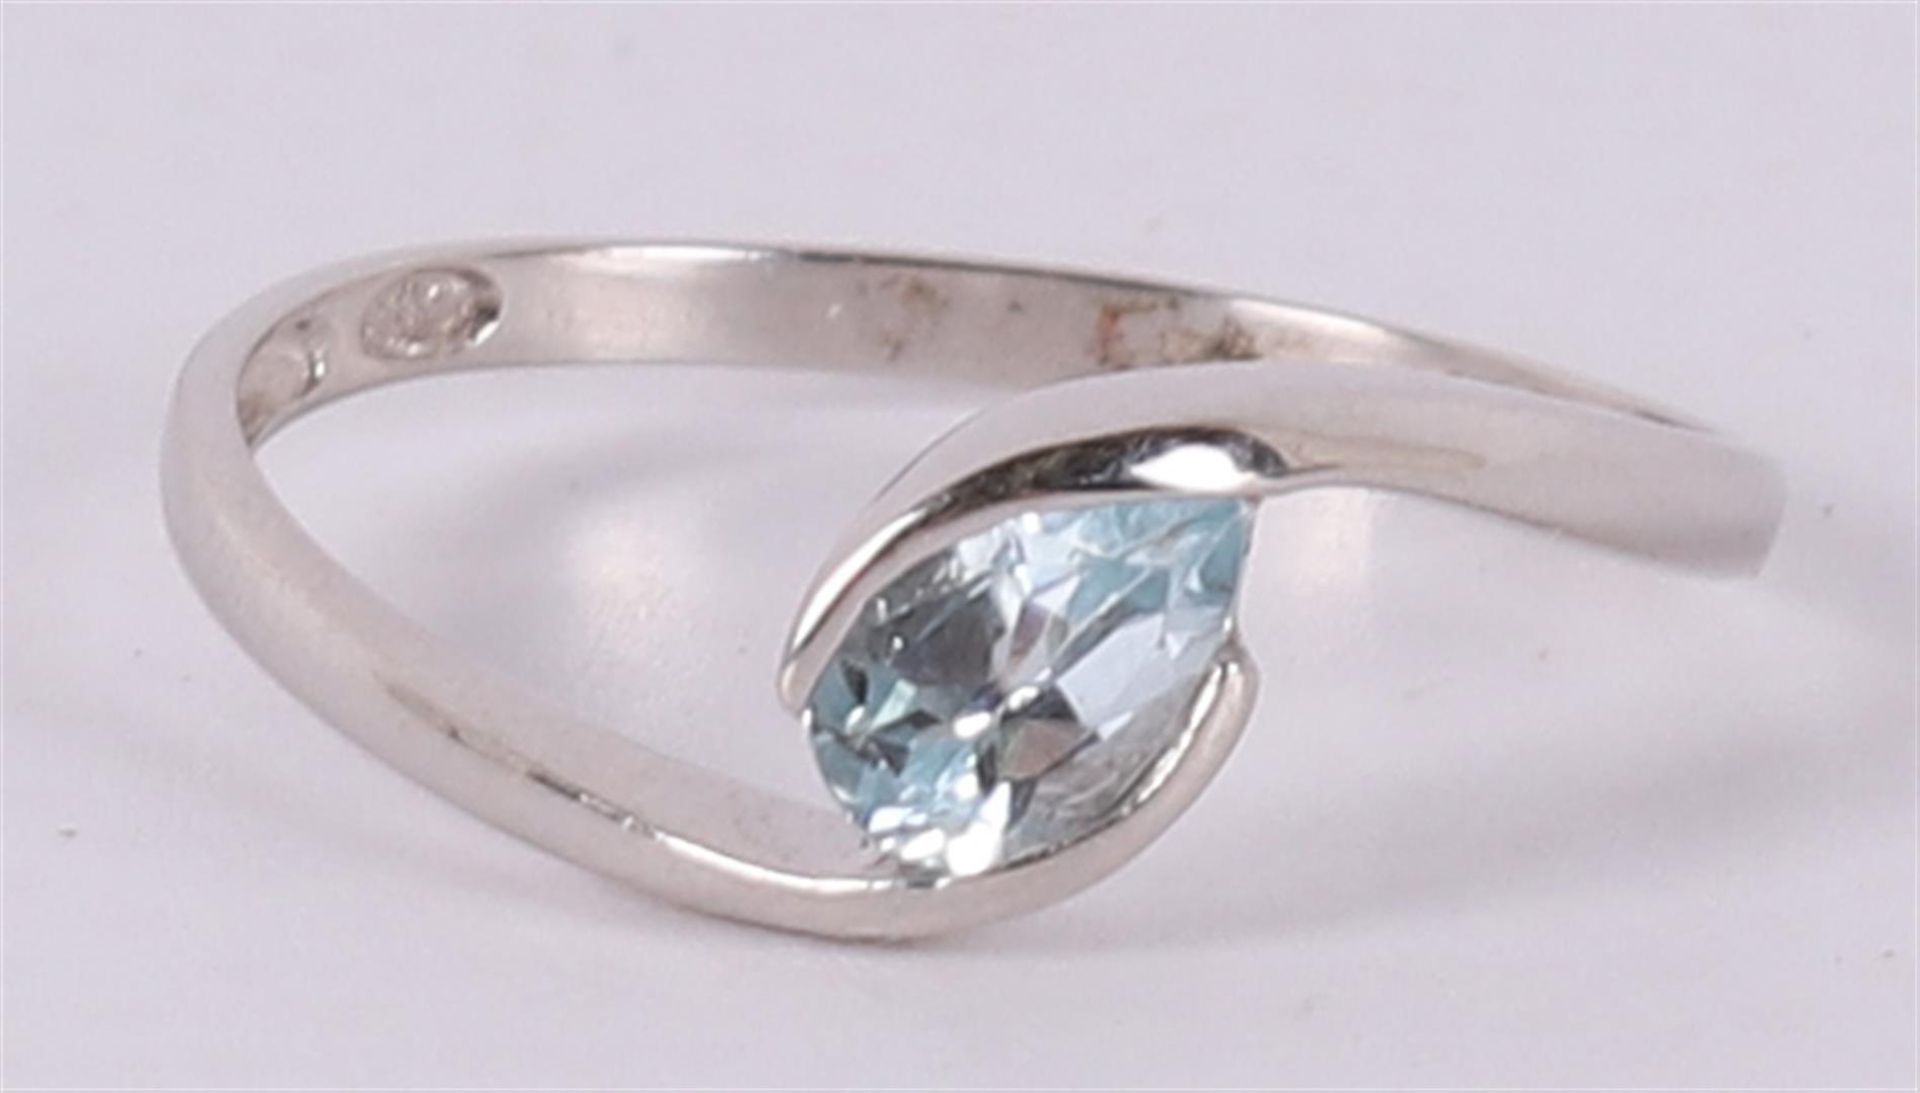 An 18 kt 750/1000 gold ring with a pear-shaped cut aquamarine. Ring size 17.75 mm.